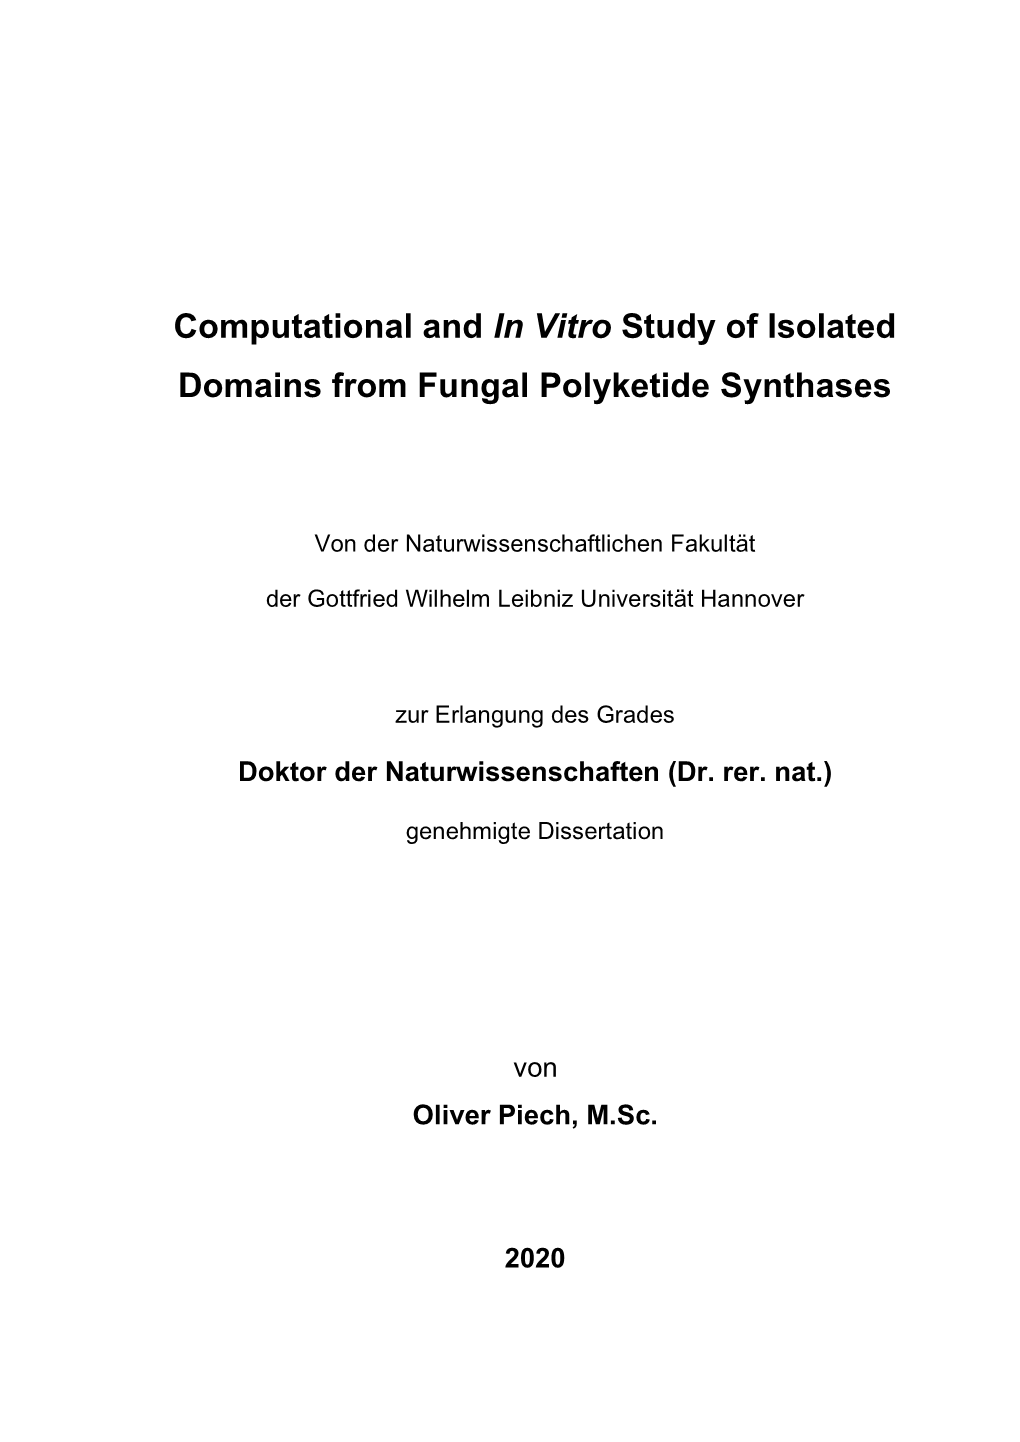 Computational and in Vitro Study of Isolated Domains from Fungal Polyketide Synthases